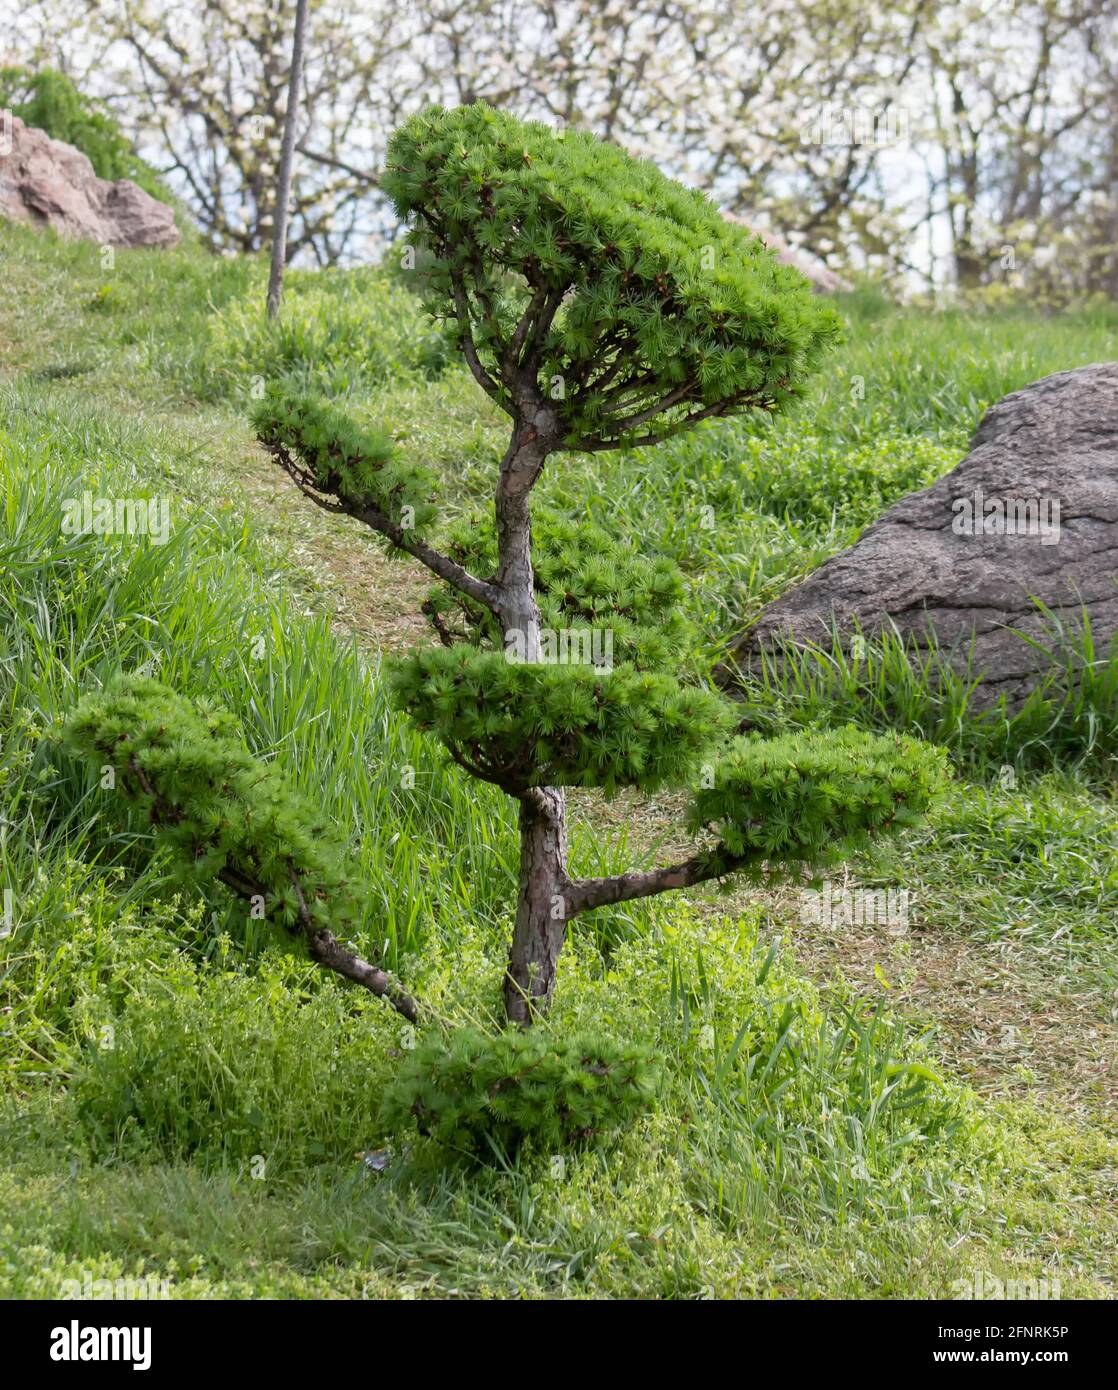 Larix, larch tree, pruned in the style of a bonsai tree. Ornamental plant for yard decoration Stock Photo